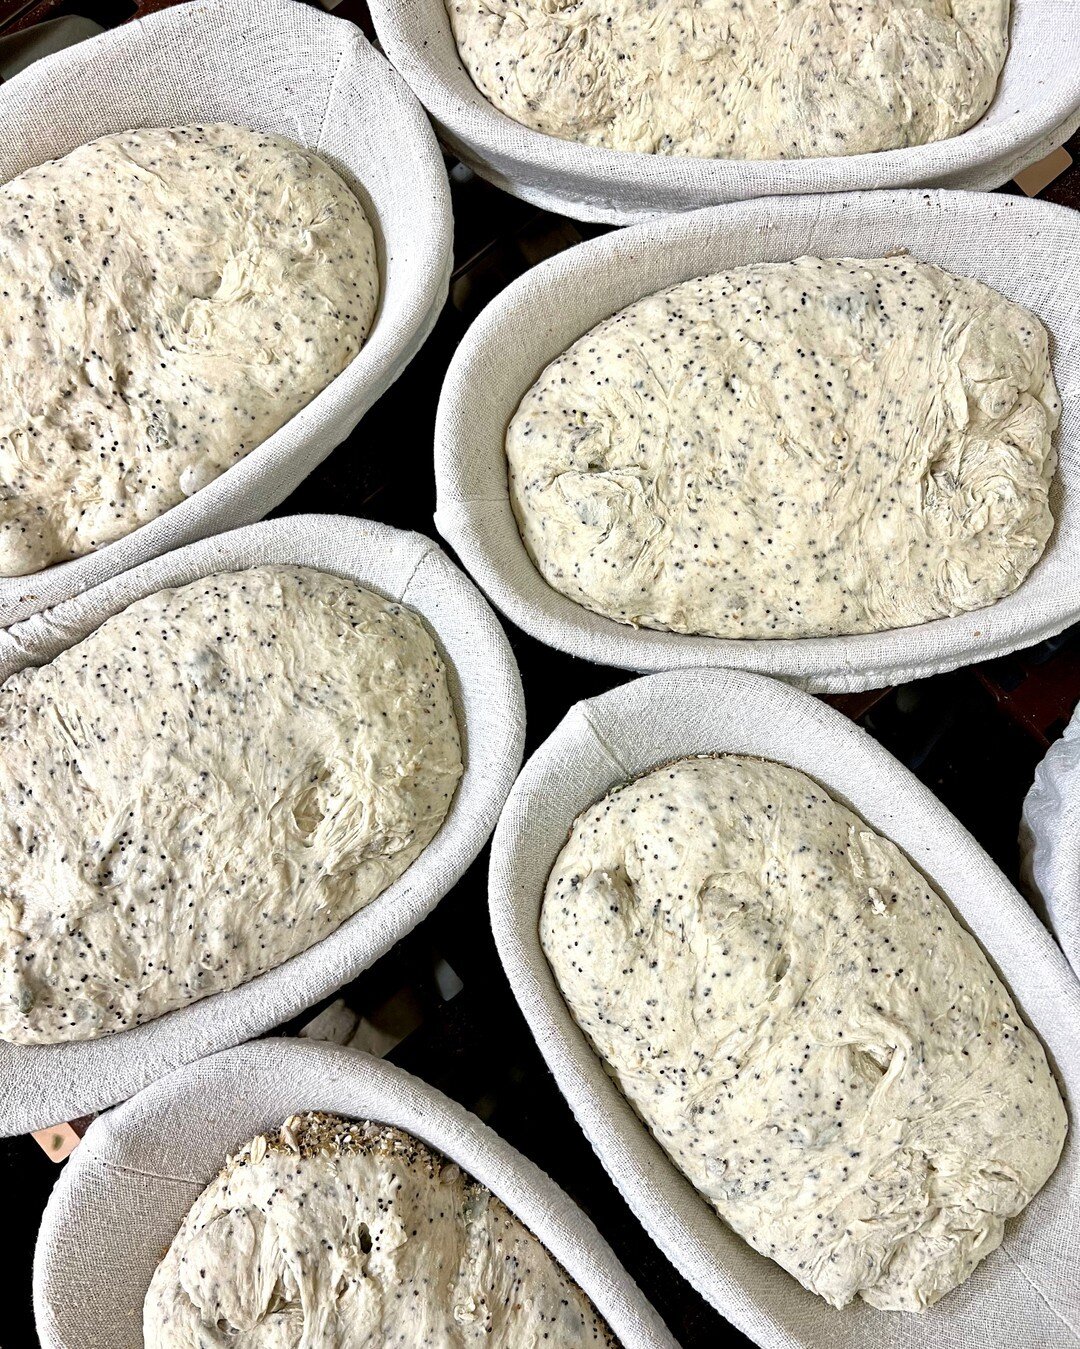 Tomorrow&rsquo;s bird seed loaf in the making! ​​​​​​​​
​​​​​​​​
​​​​​​​​
​​​​​​​​
​​​​​​​​
#betterbread #bredco #bredbread #albany #sustainable #artisanbread #lovacore #sourdough #realbread #flourwatersalt #localproduce #amazingalbany #greatsouthern